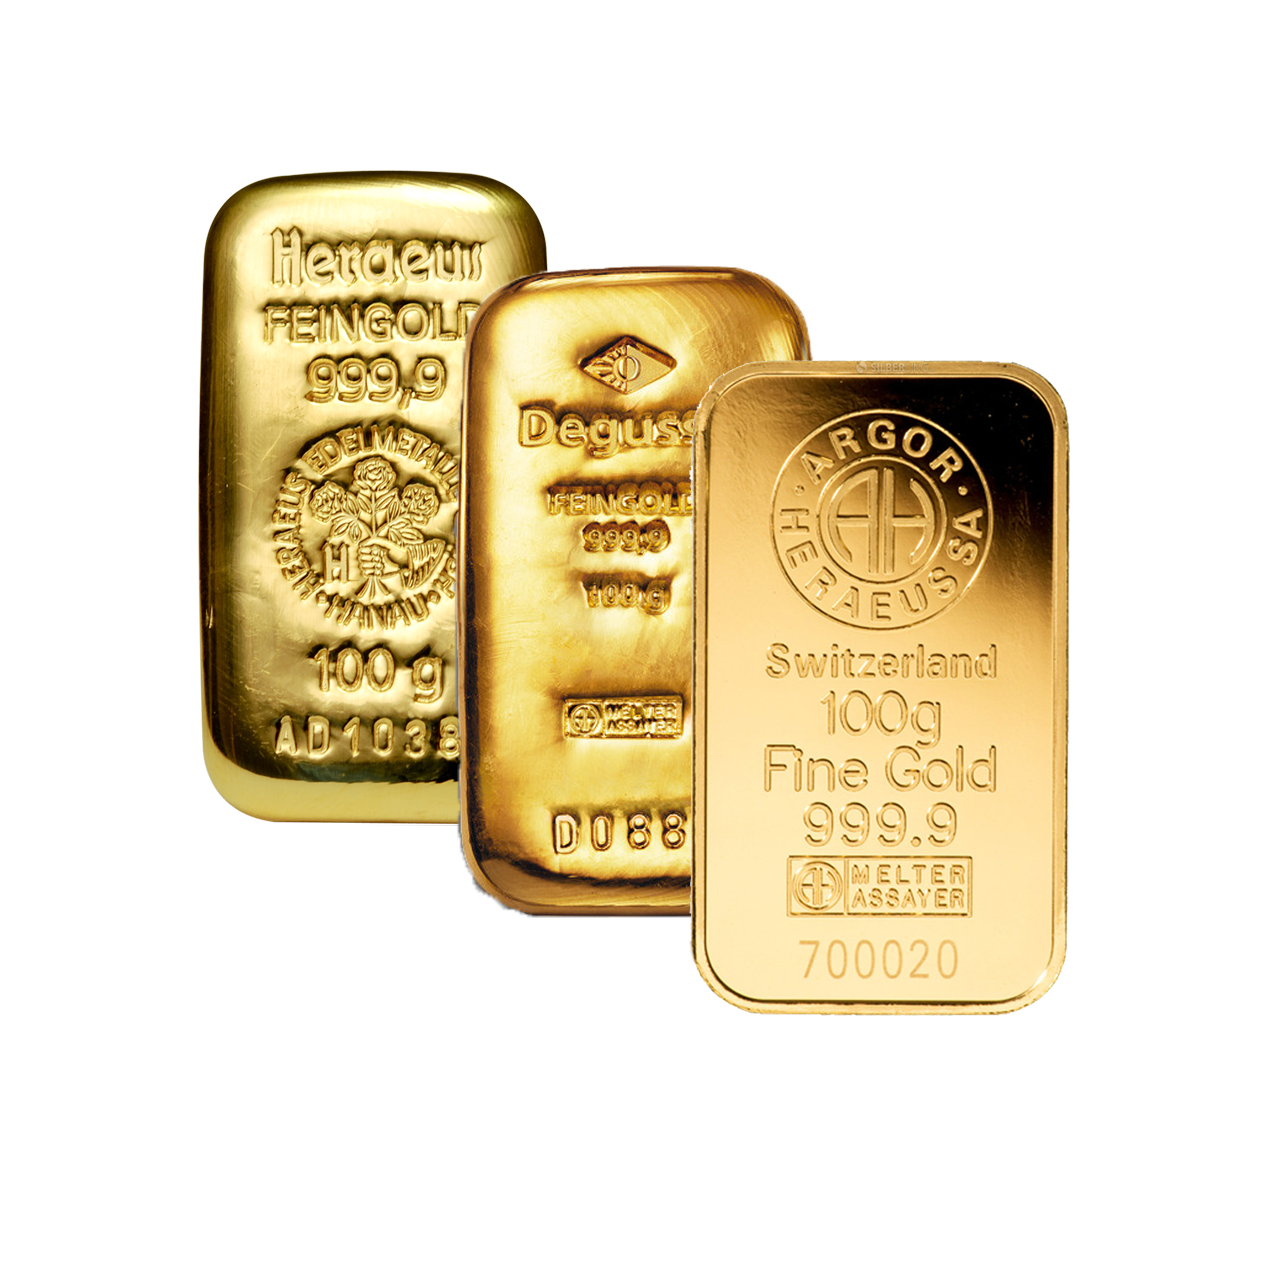 gold bar - 100 g fine gold .9999 - various Producers